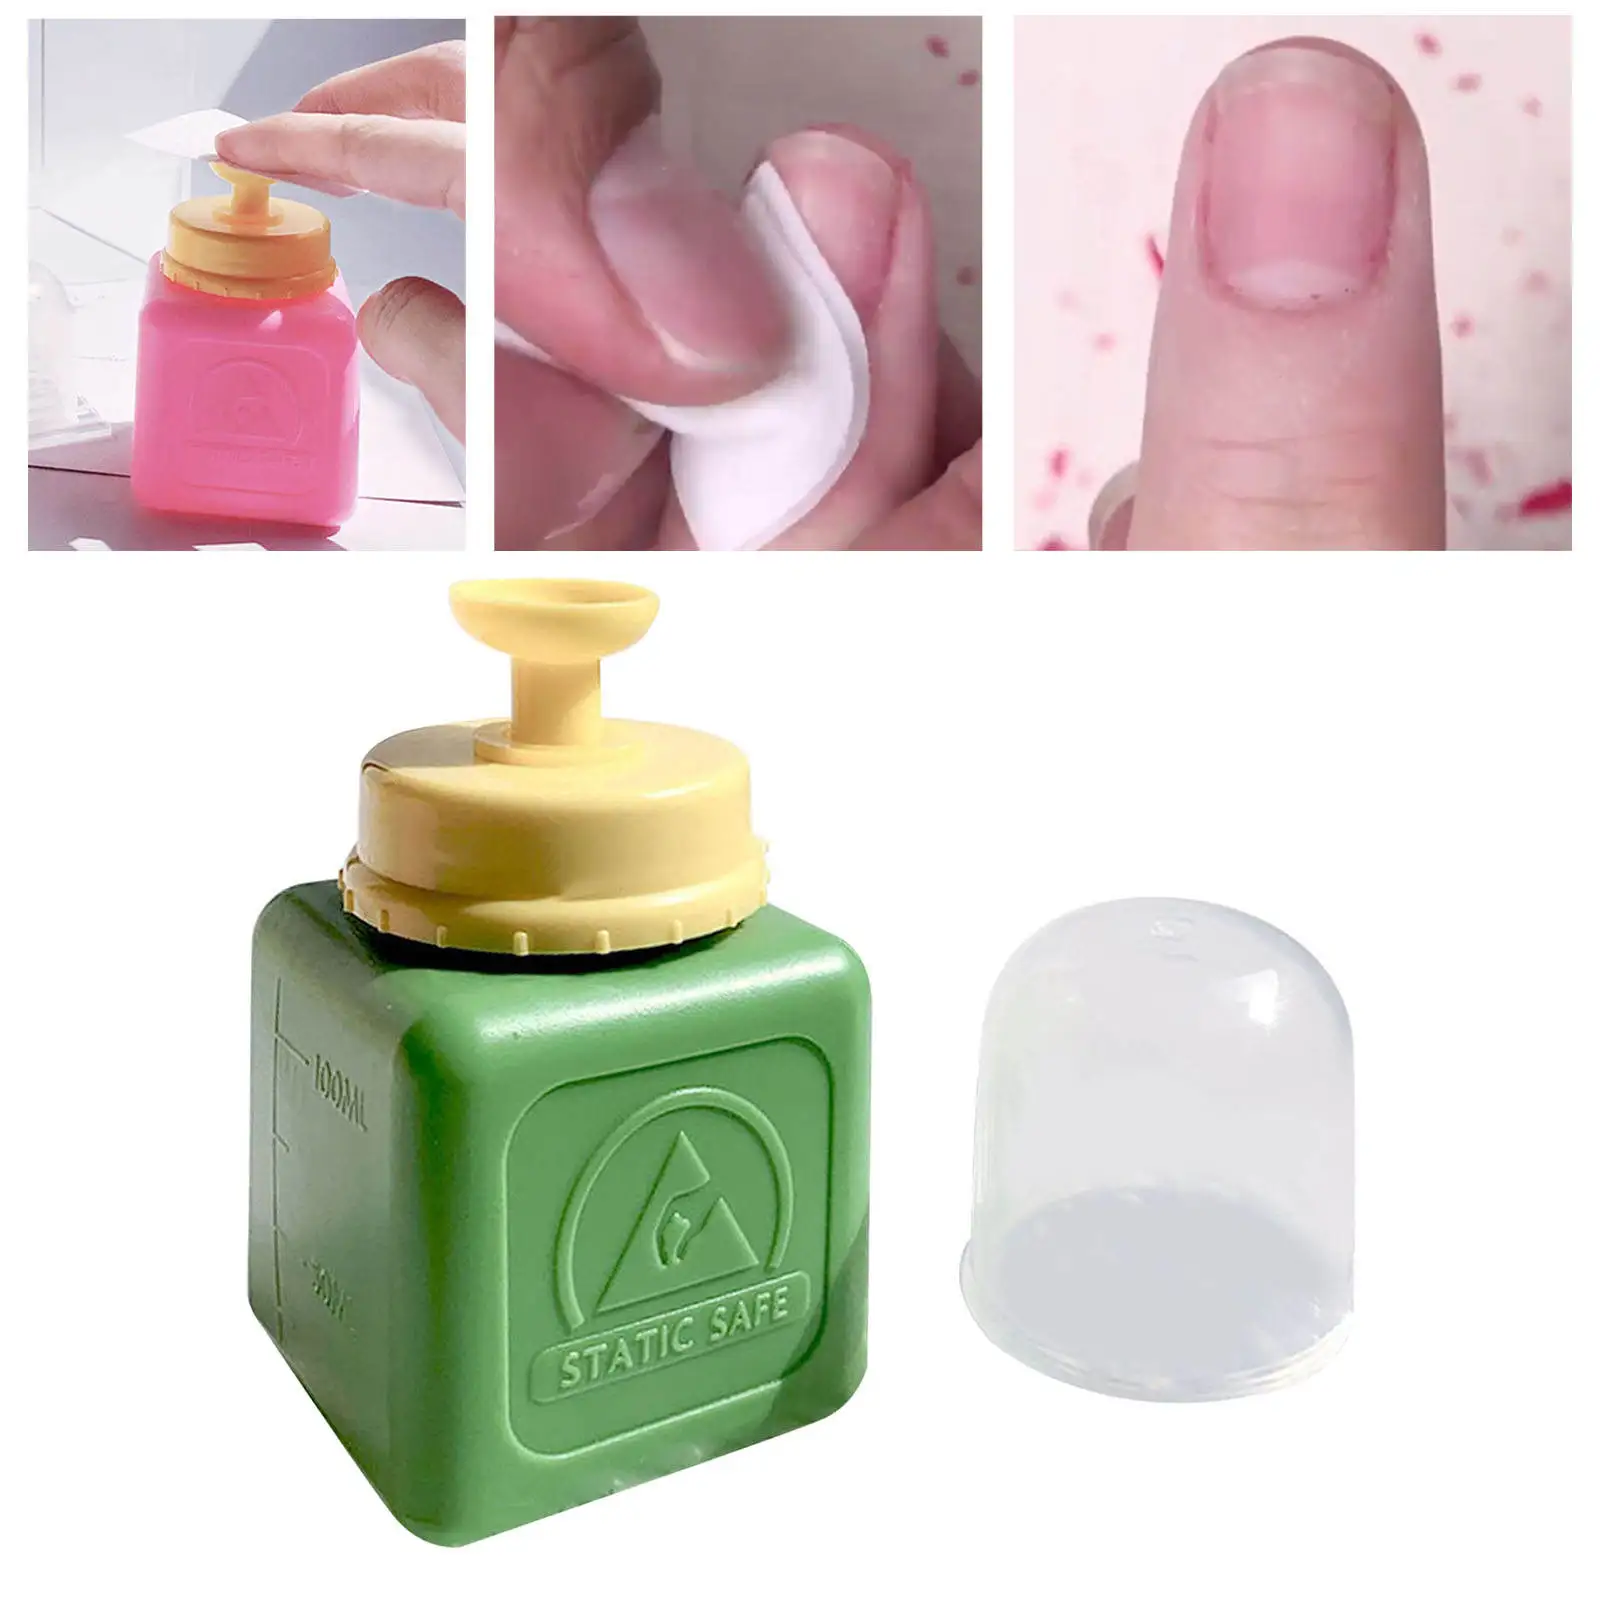 Alcohol Dispensers Press Tools Remover for Nail Polish Remover Acetone Alcohol Cosmetic